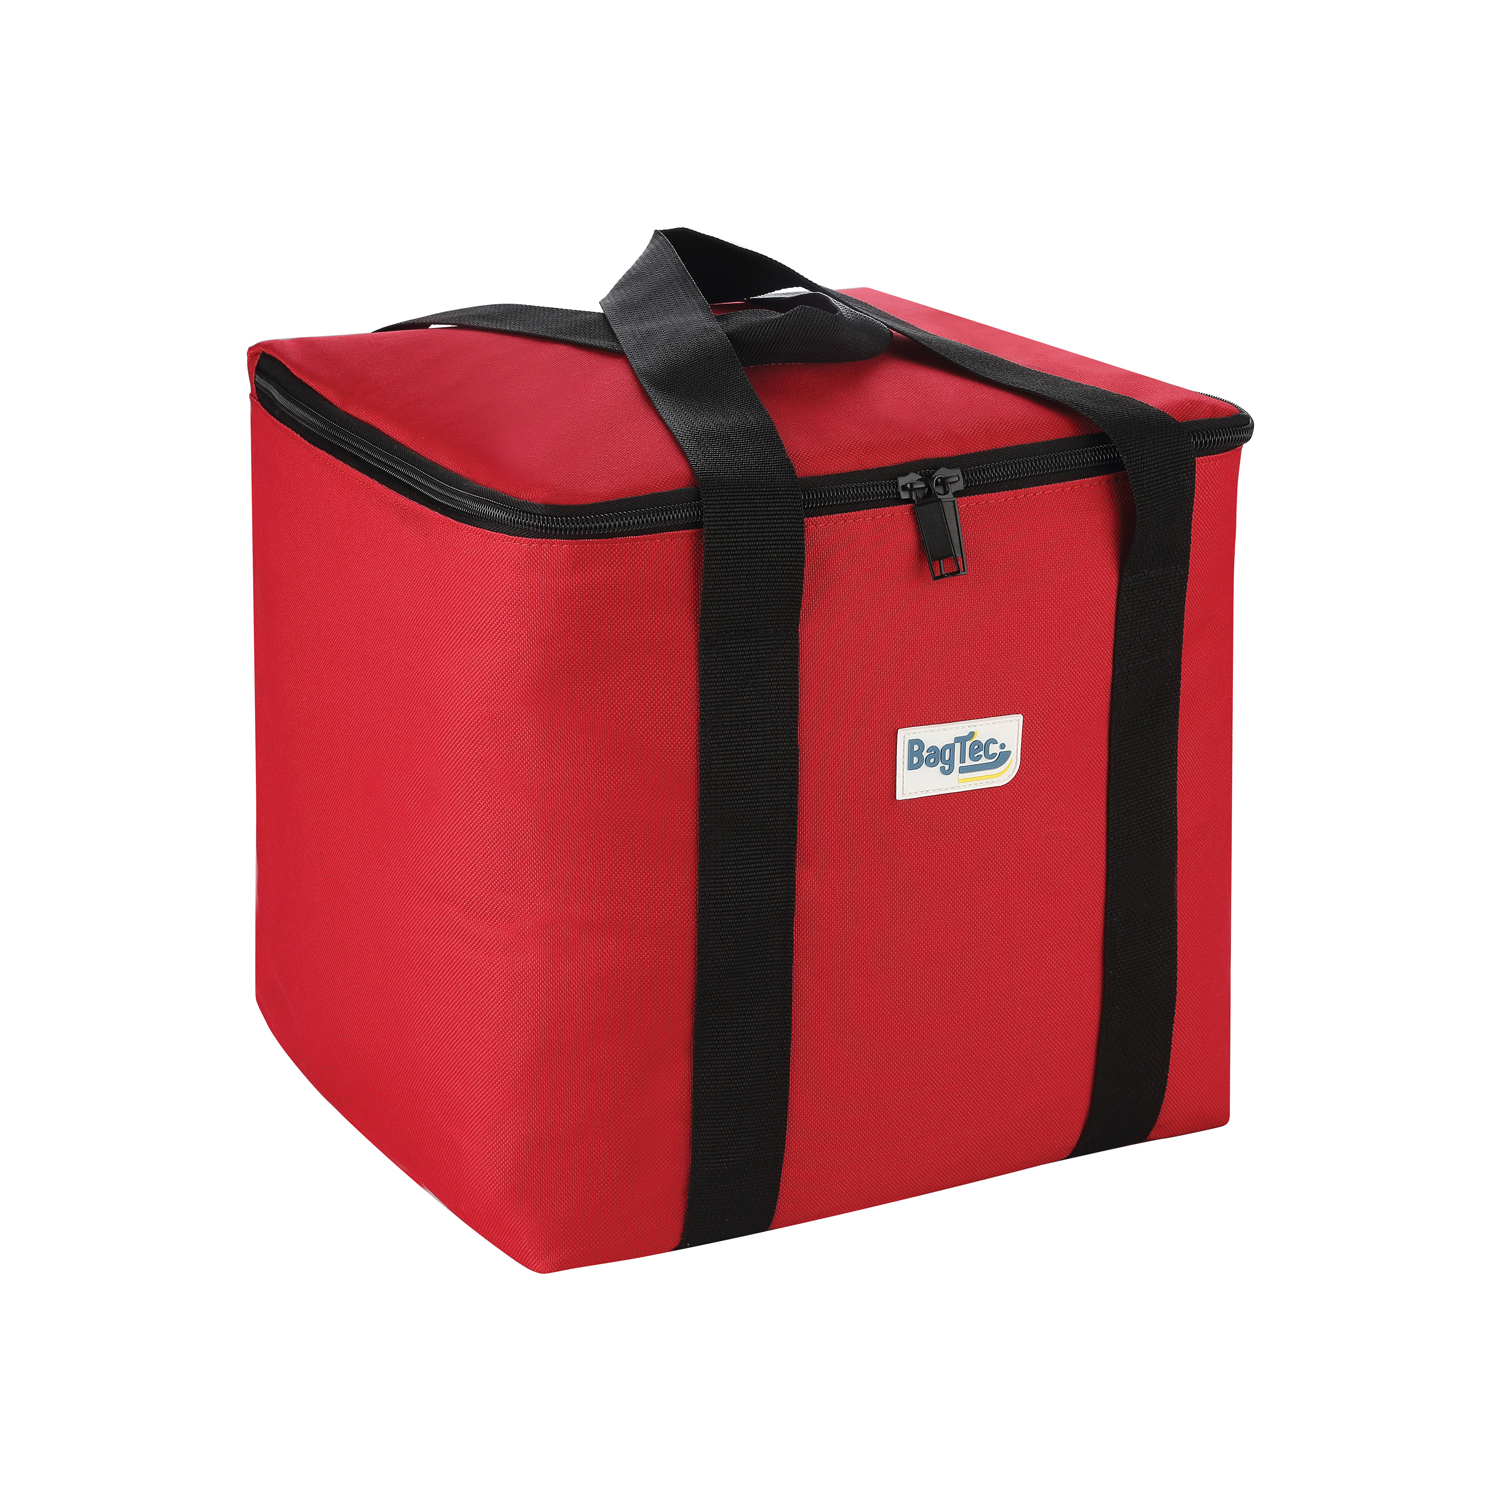 CAC China BTCA-1212R BagTec Red Catering Delivery Bag, 12" x 12" x 12" 